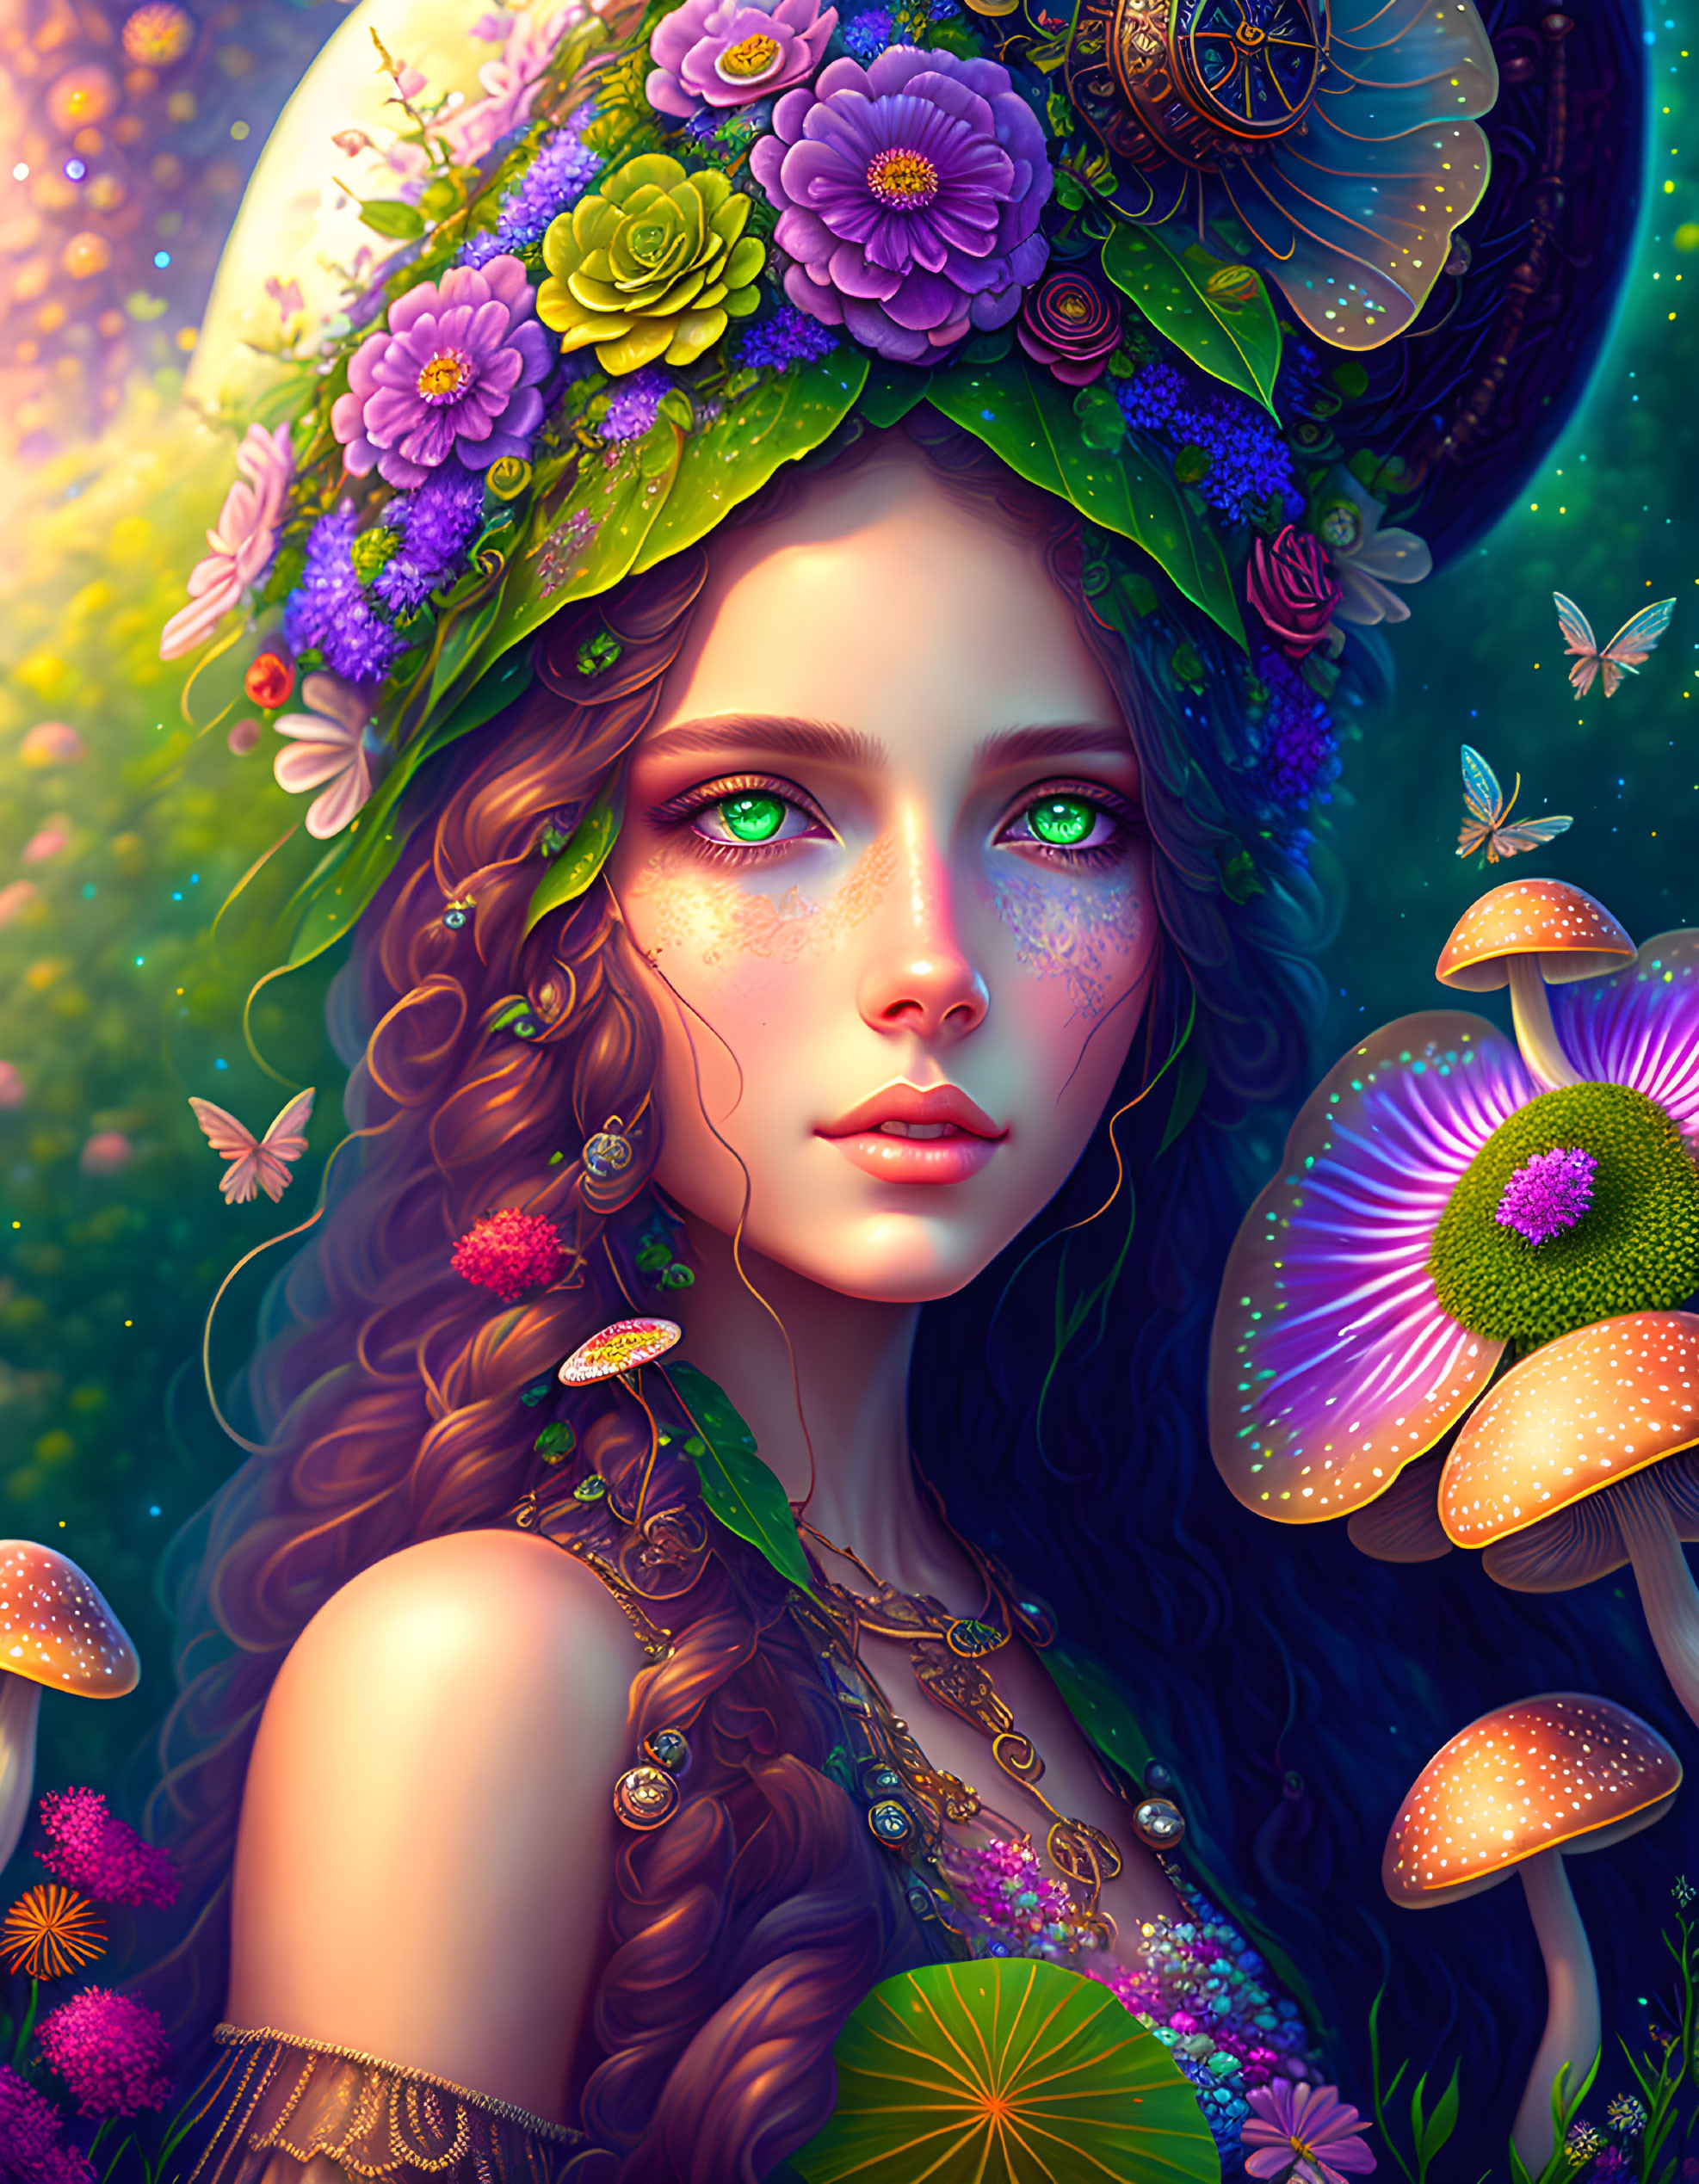 Colorful woman with floral crown, butterflies, and glowing mushrooms in fantasy illustration